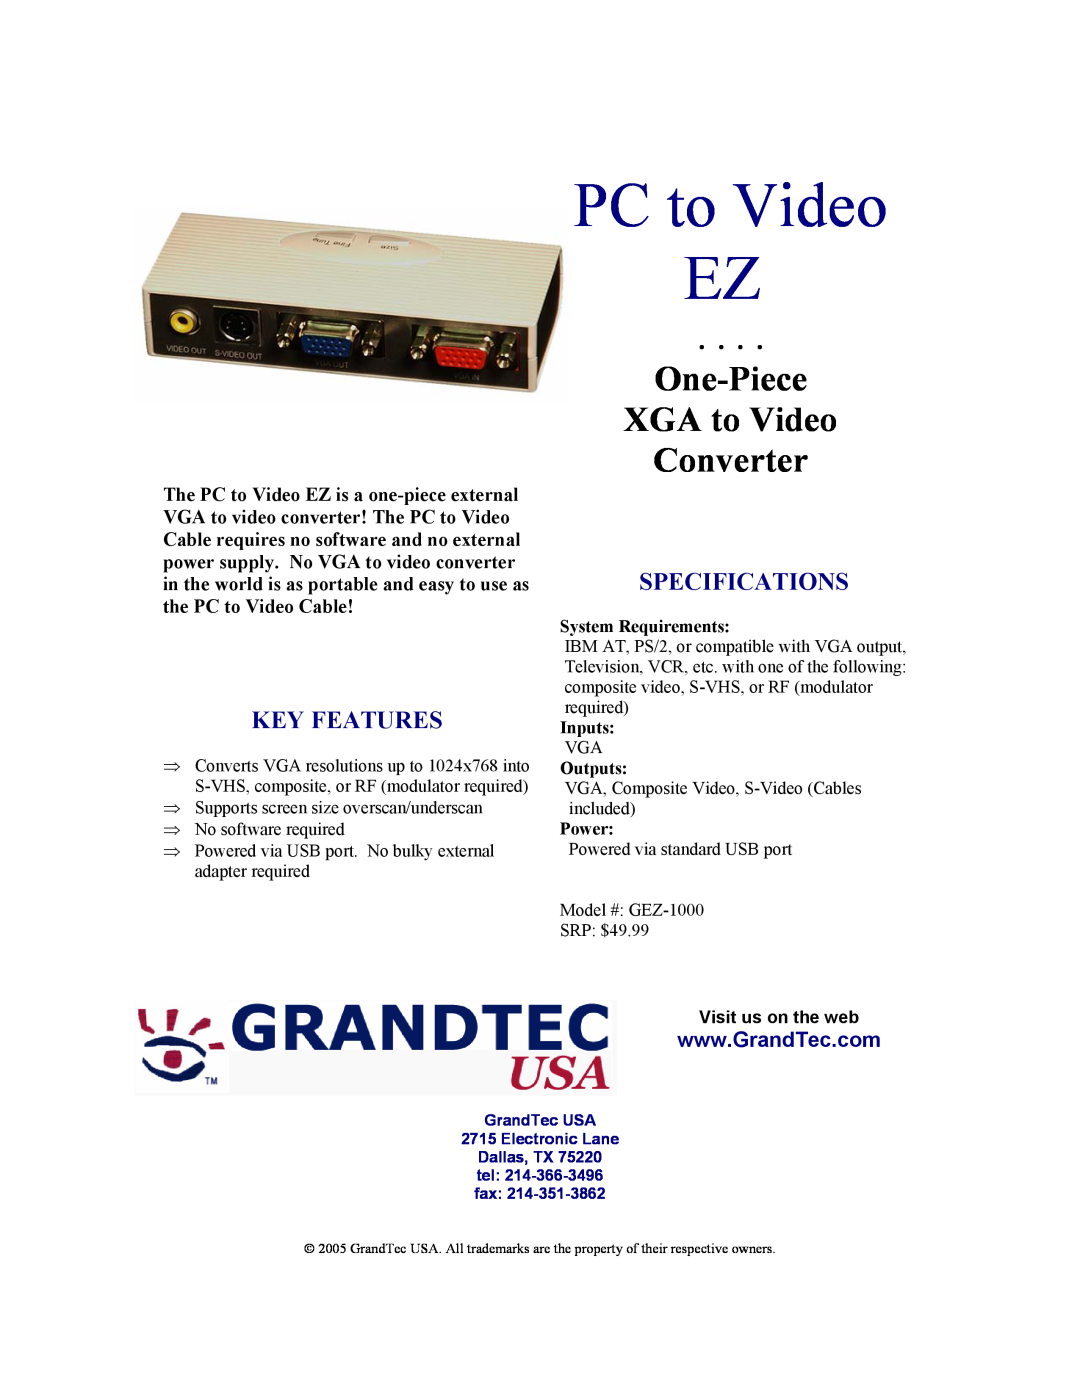 GrandTec GEZ-1000 specifications PC to Video EZ, One-Piece XGA to Video Converter, Key Features, Specifications, Inputs 